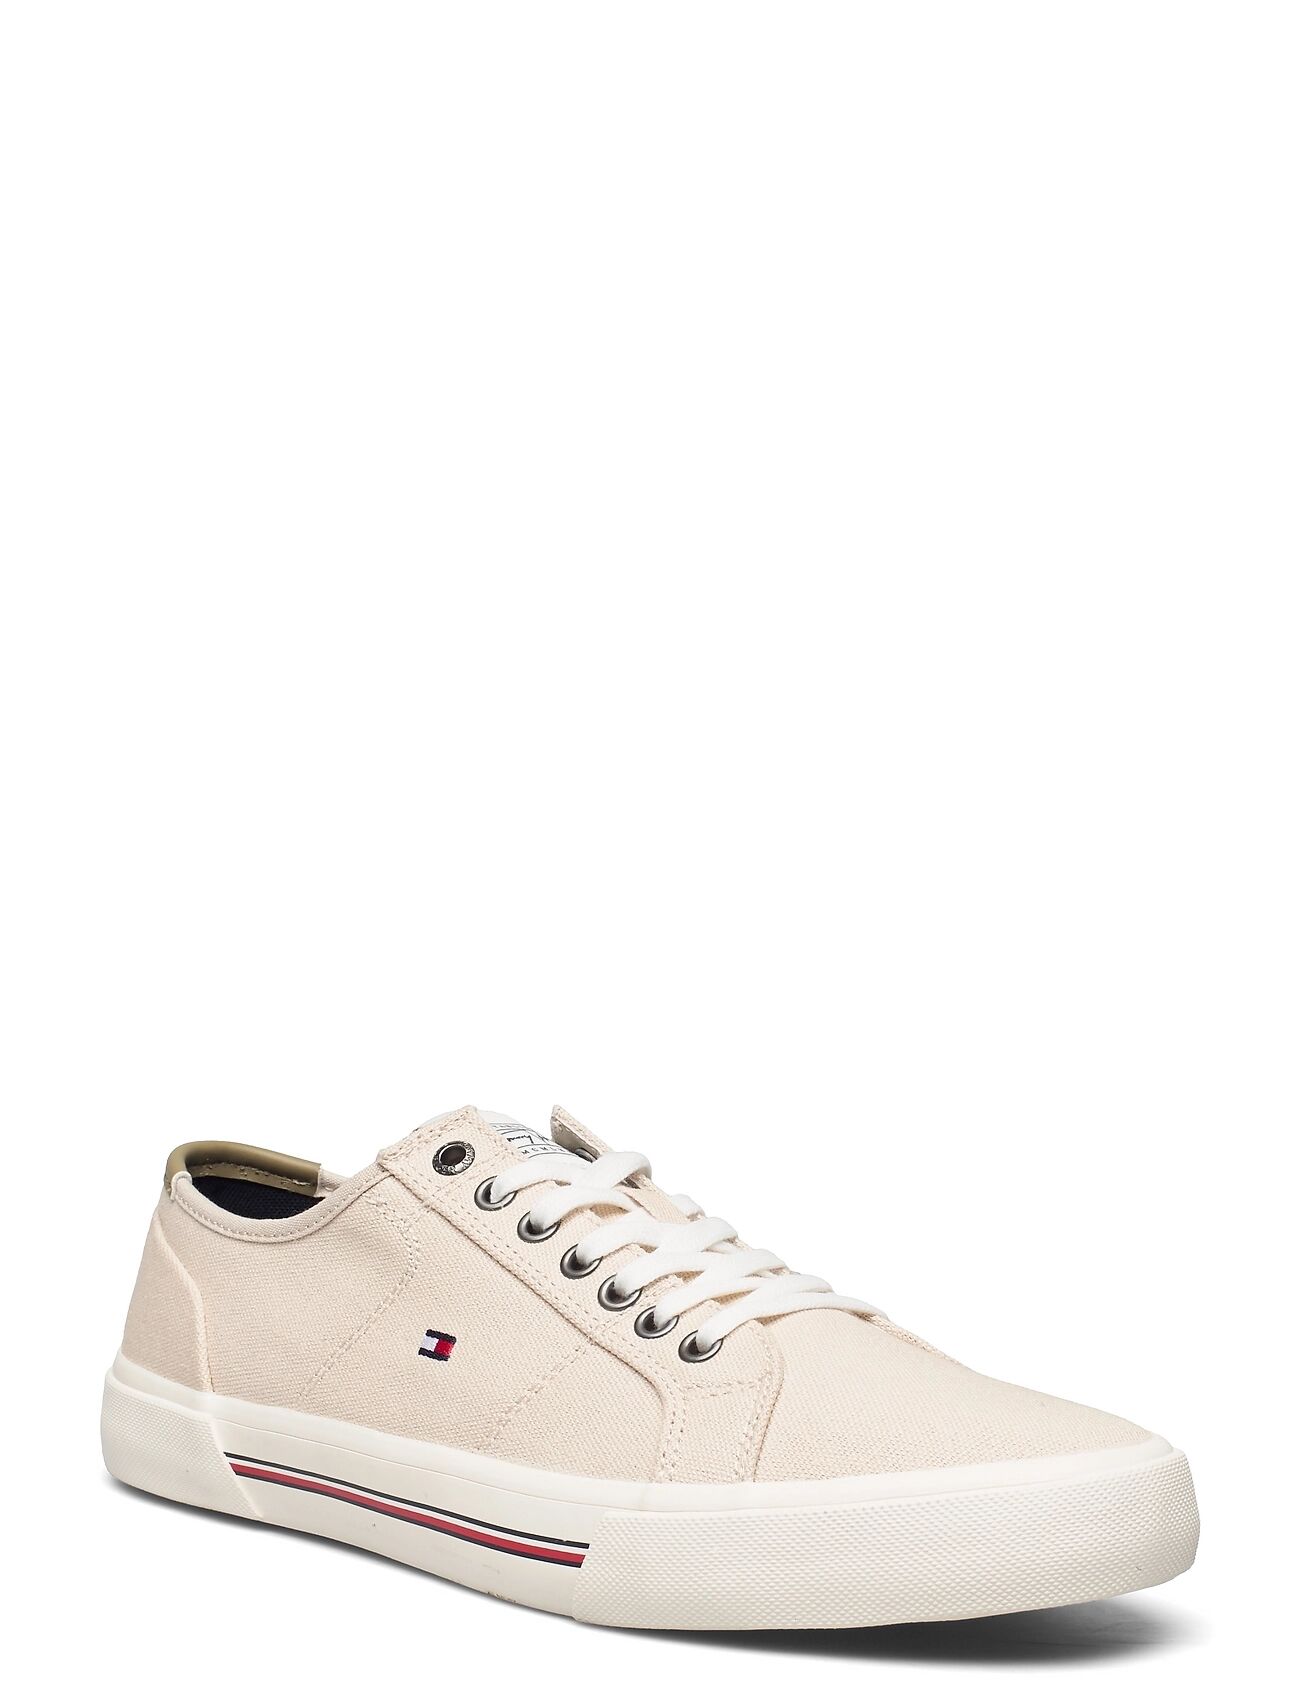 Tommy Hilfiger Core Corporate Canvas Vulc Lave Sneakers Beige Tommy Hilfiger